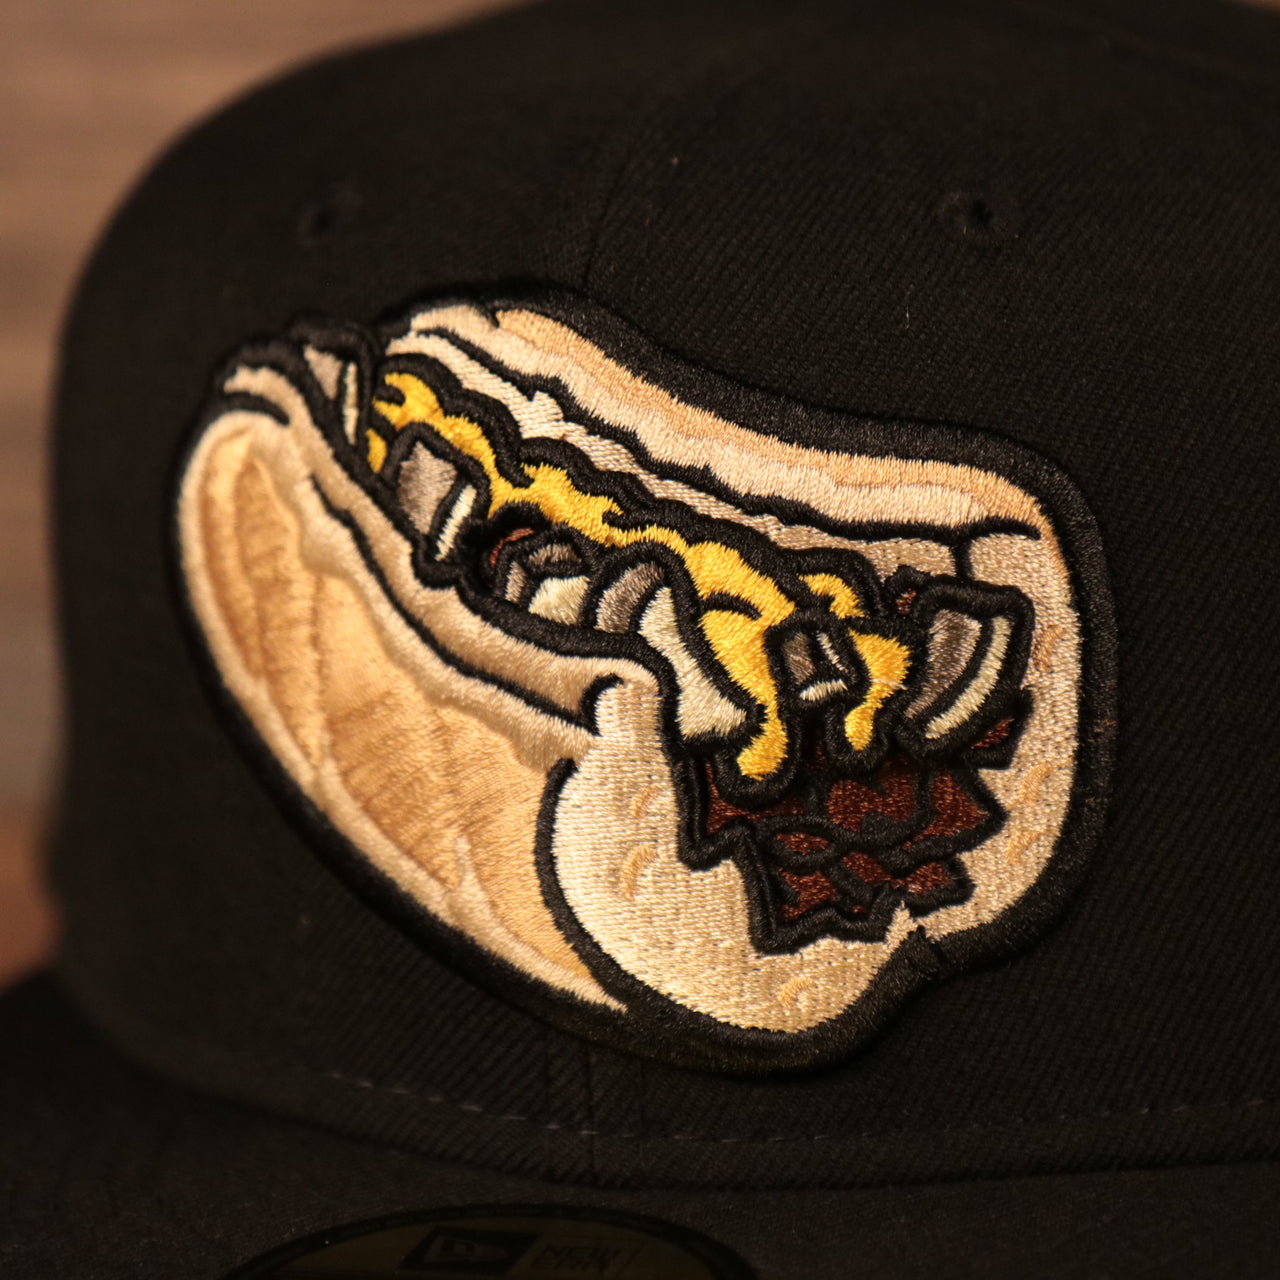 The Philly cheesesteak with onions patch on the front of the black Lehigh Valley Iron Pigs New Era fitted cap.